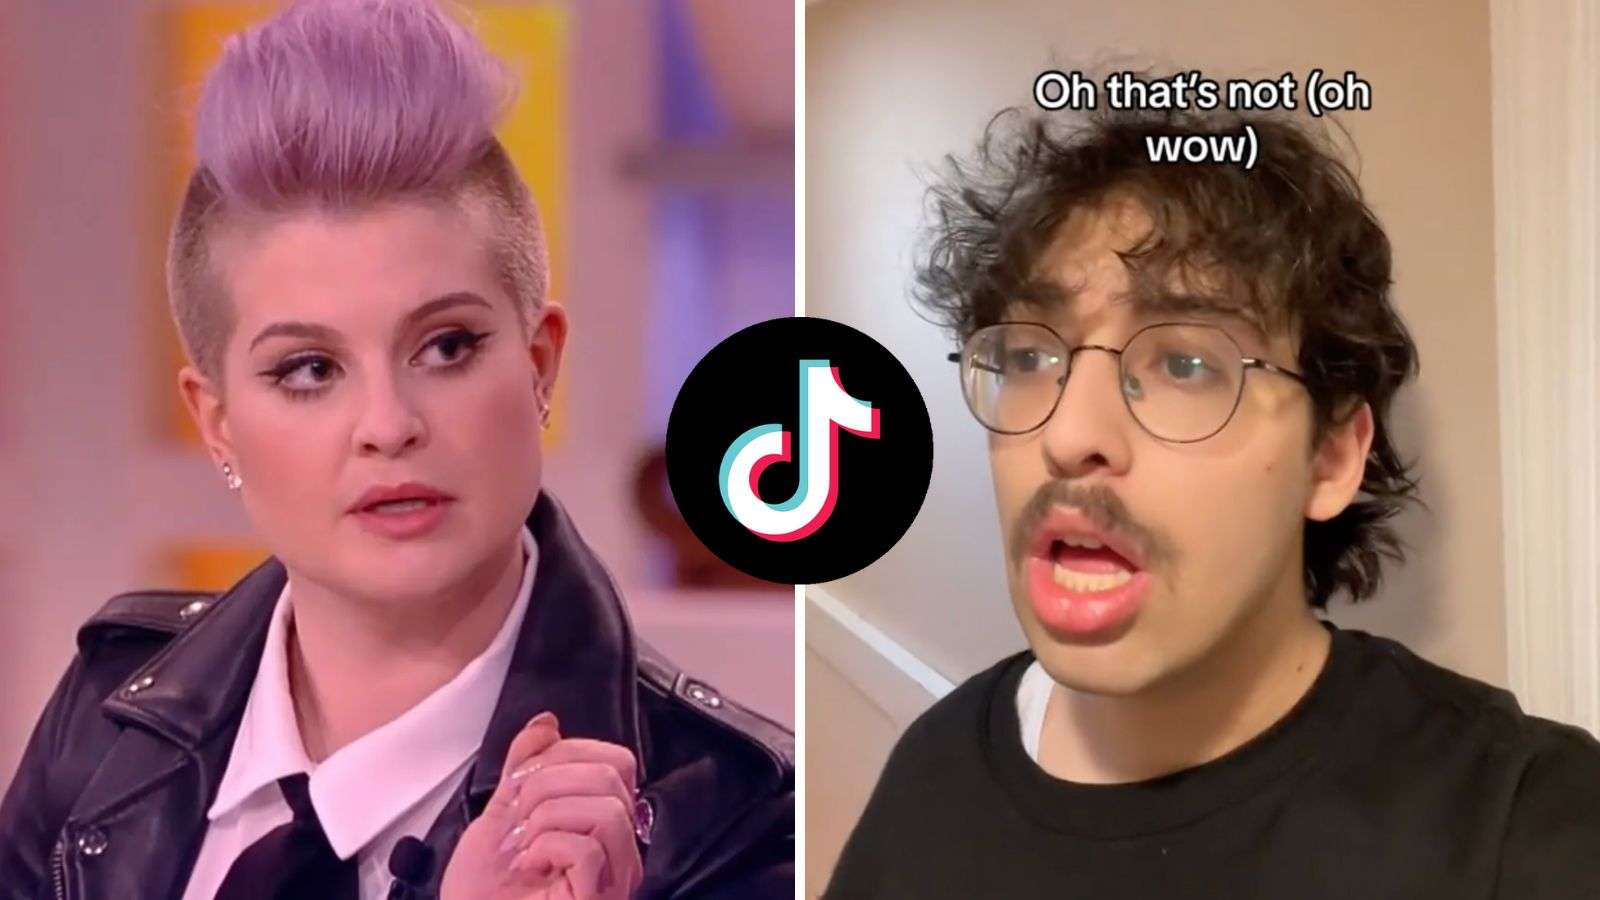 What is the viral ‘Oh that’s not’ trend on TikTok?